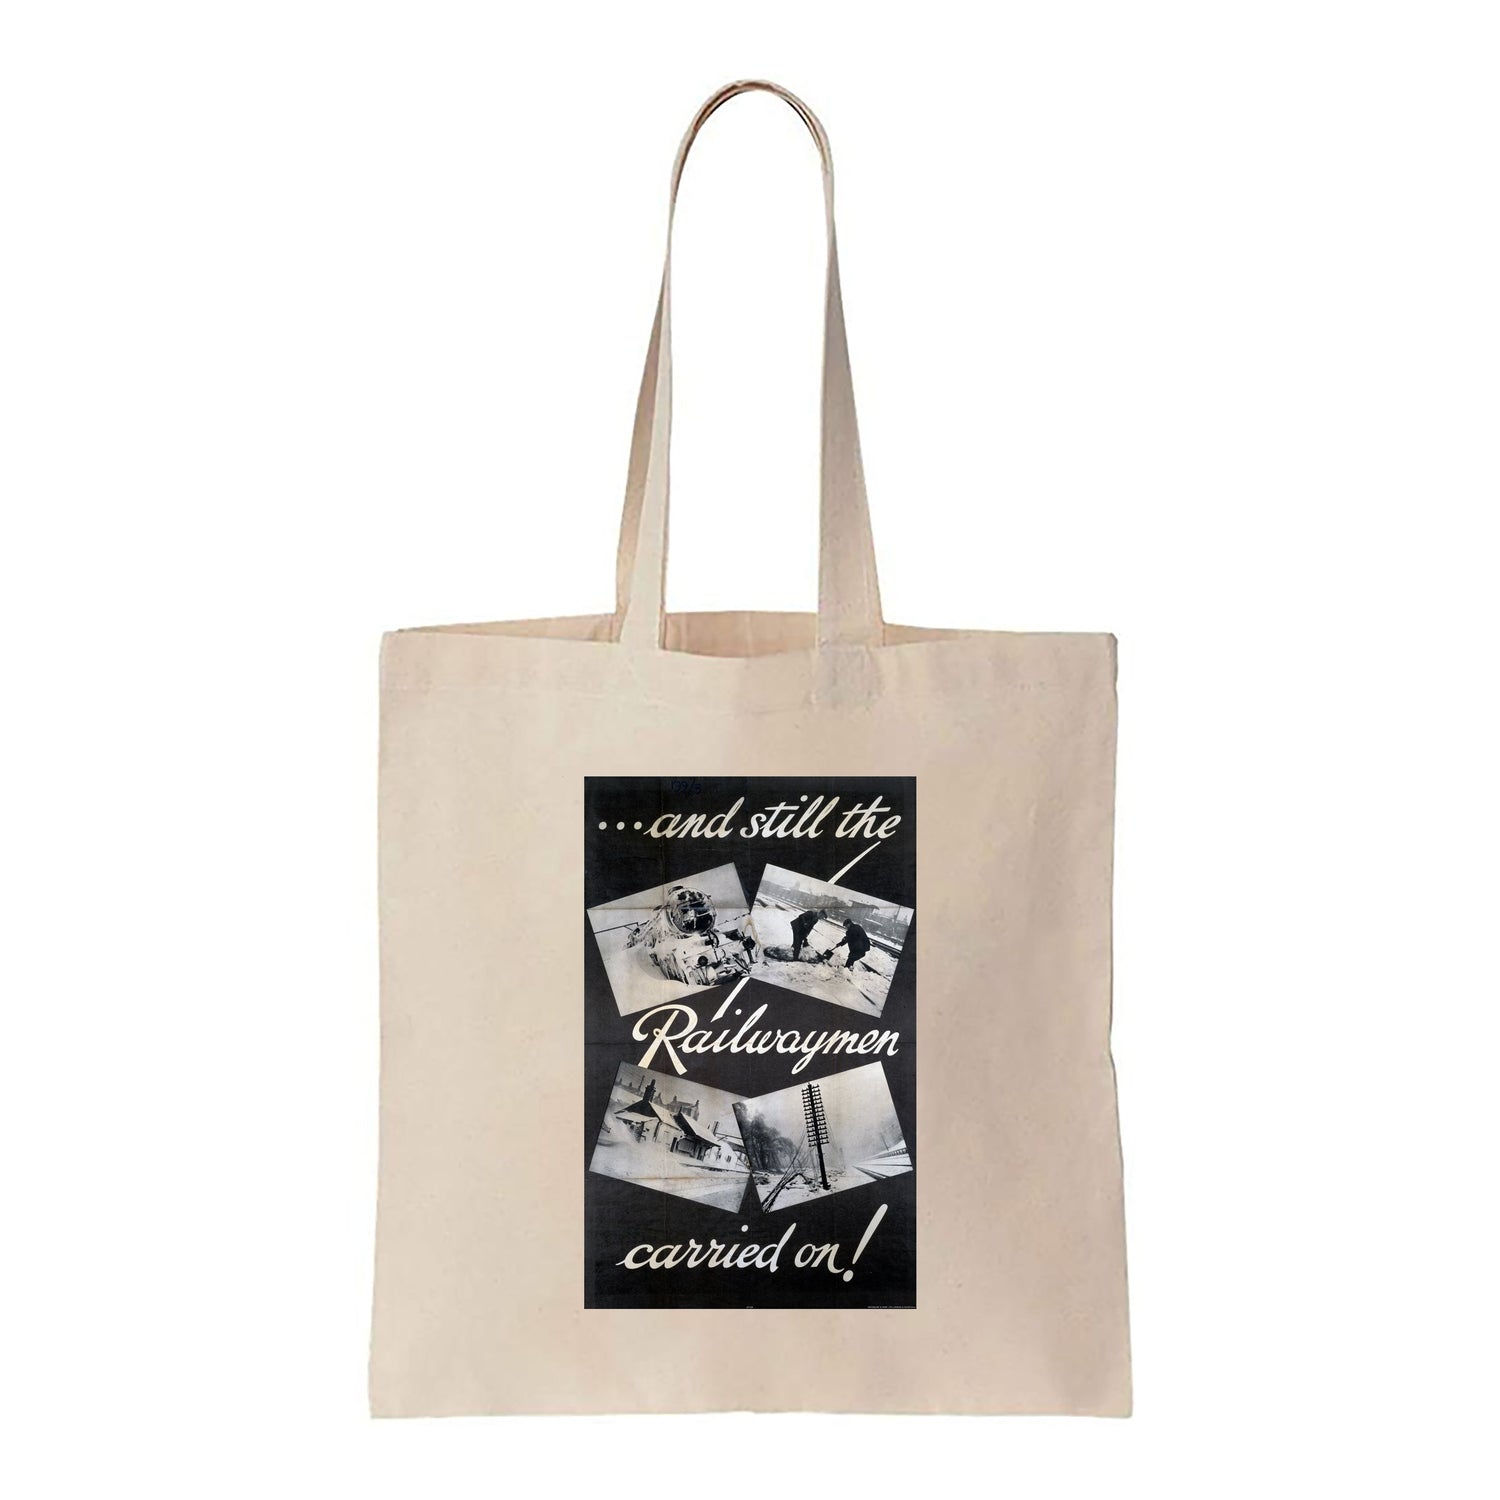 And still the Railwaymen carried on! - Canvas Tote Bag